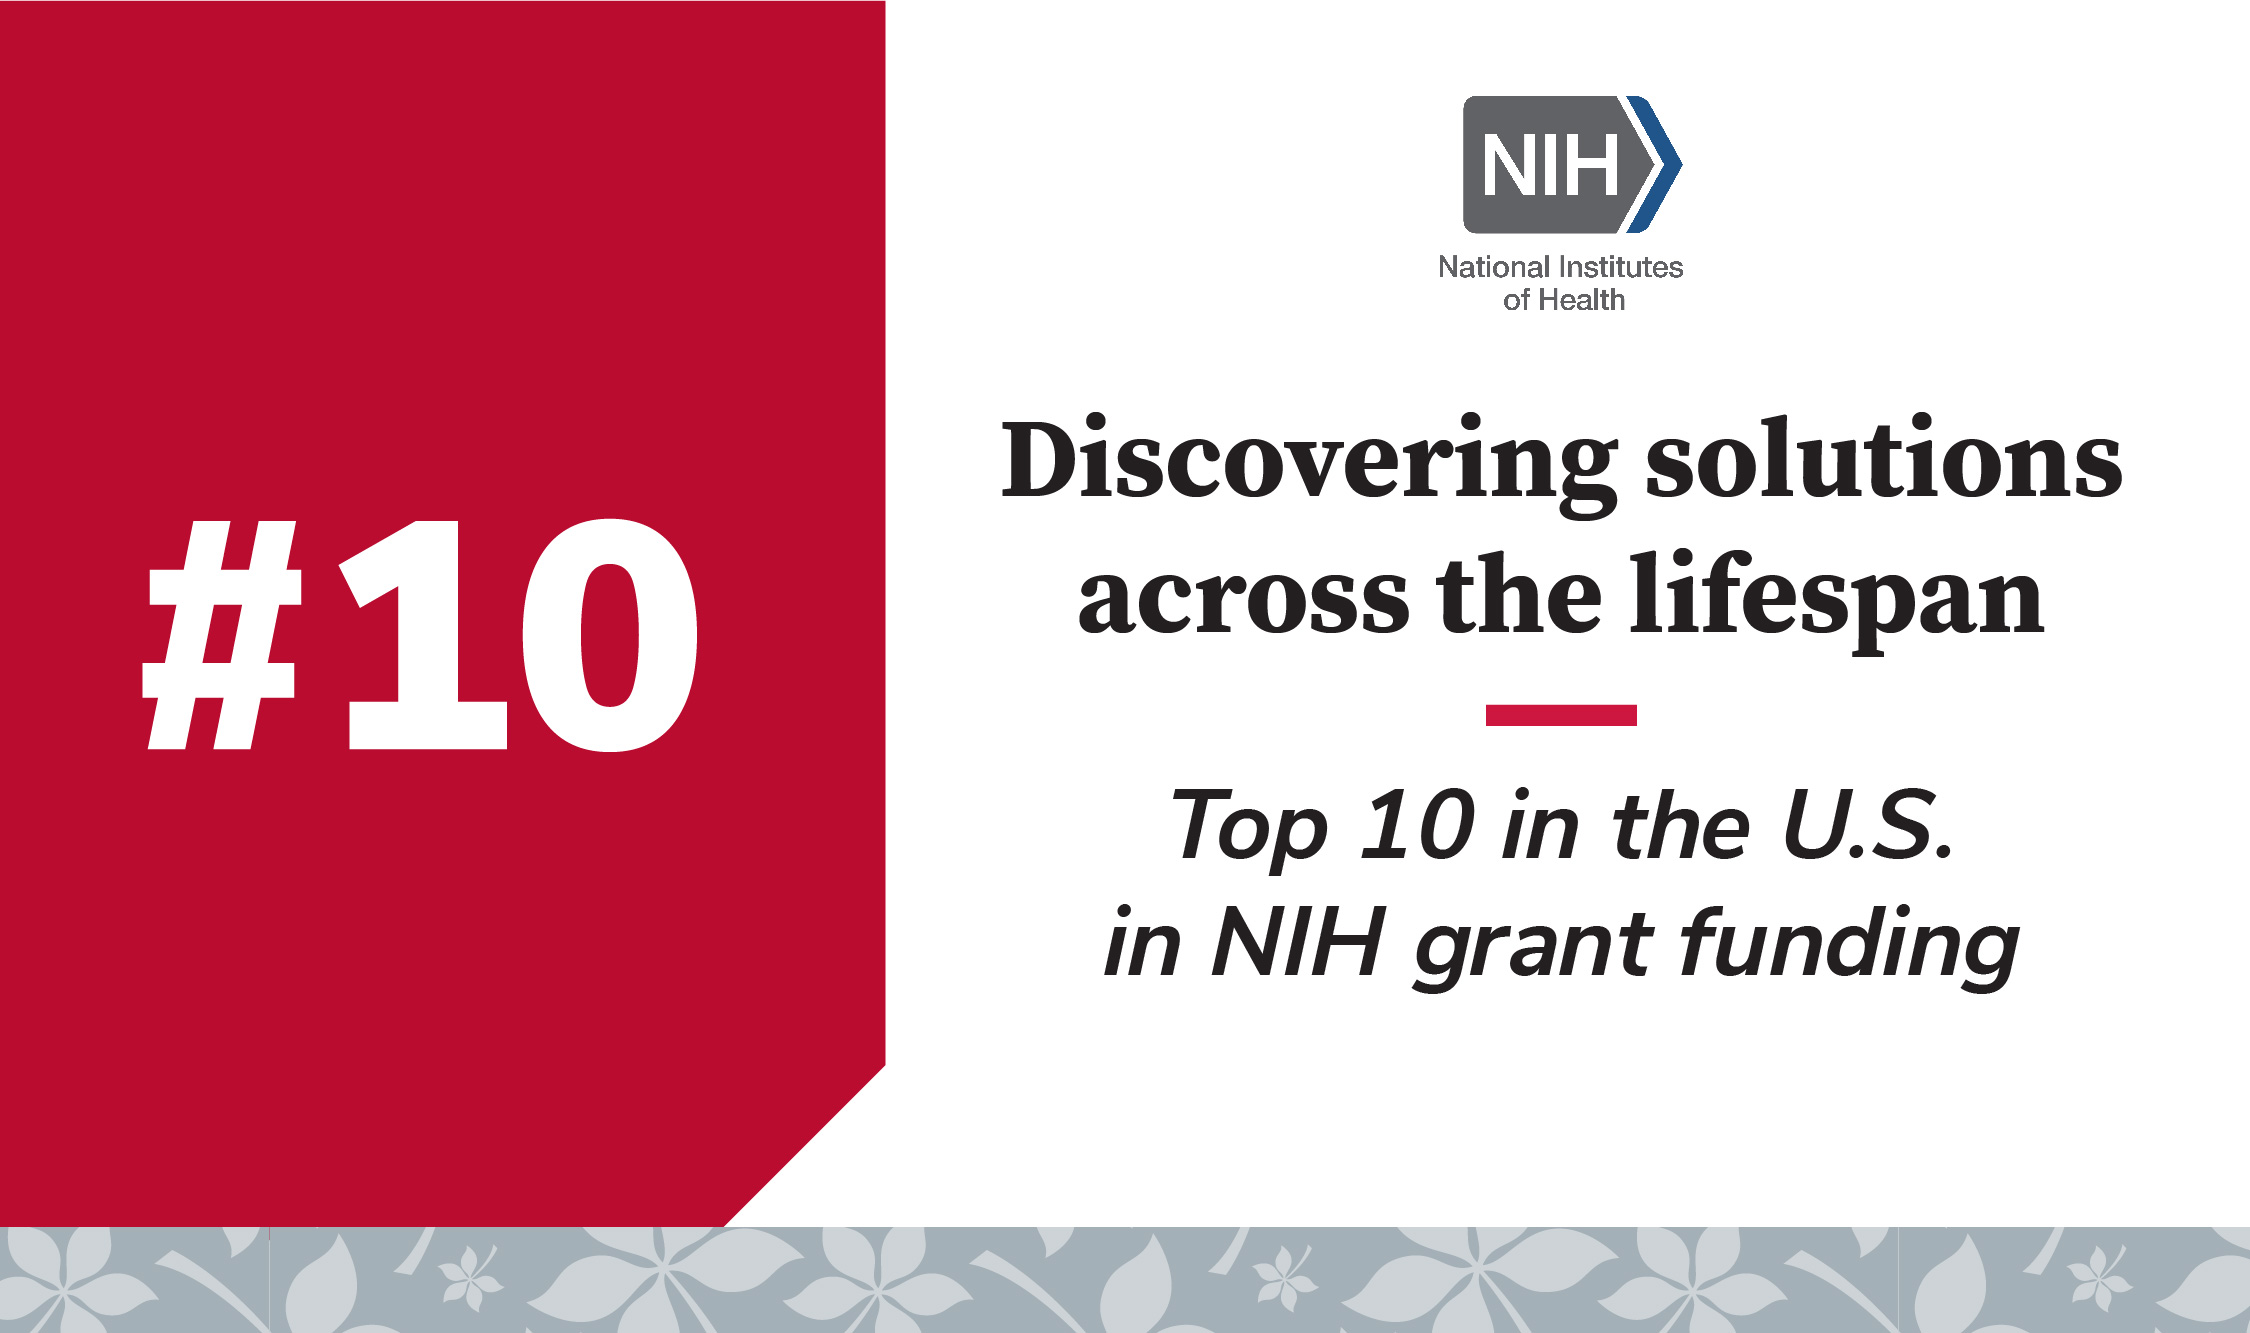 Discovering solutions across the lifespan. Top 10 in the U.S. in NIH grant funding.